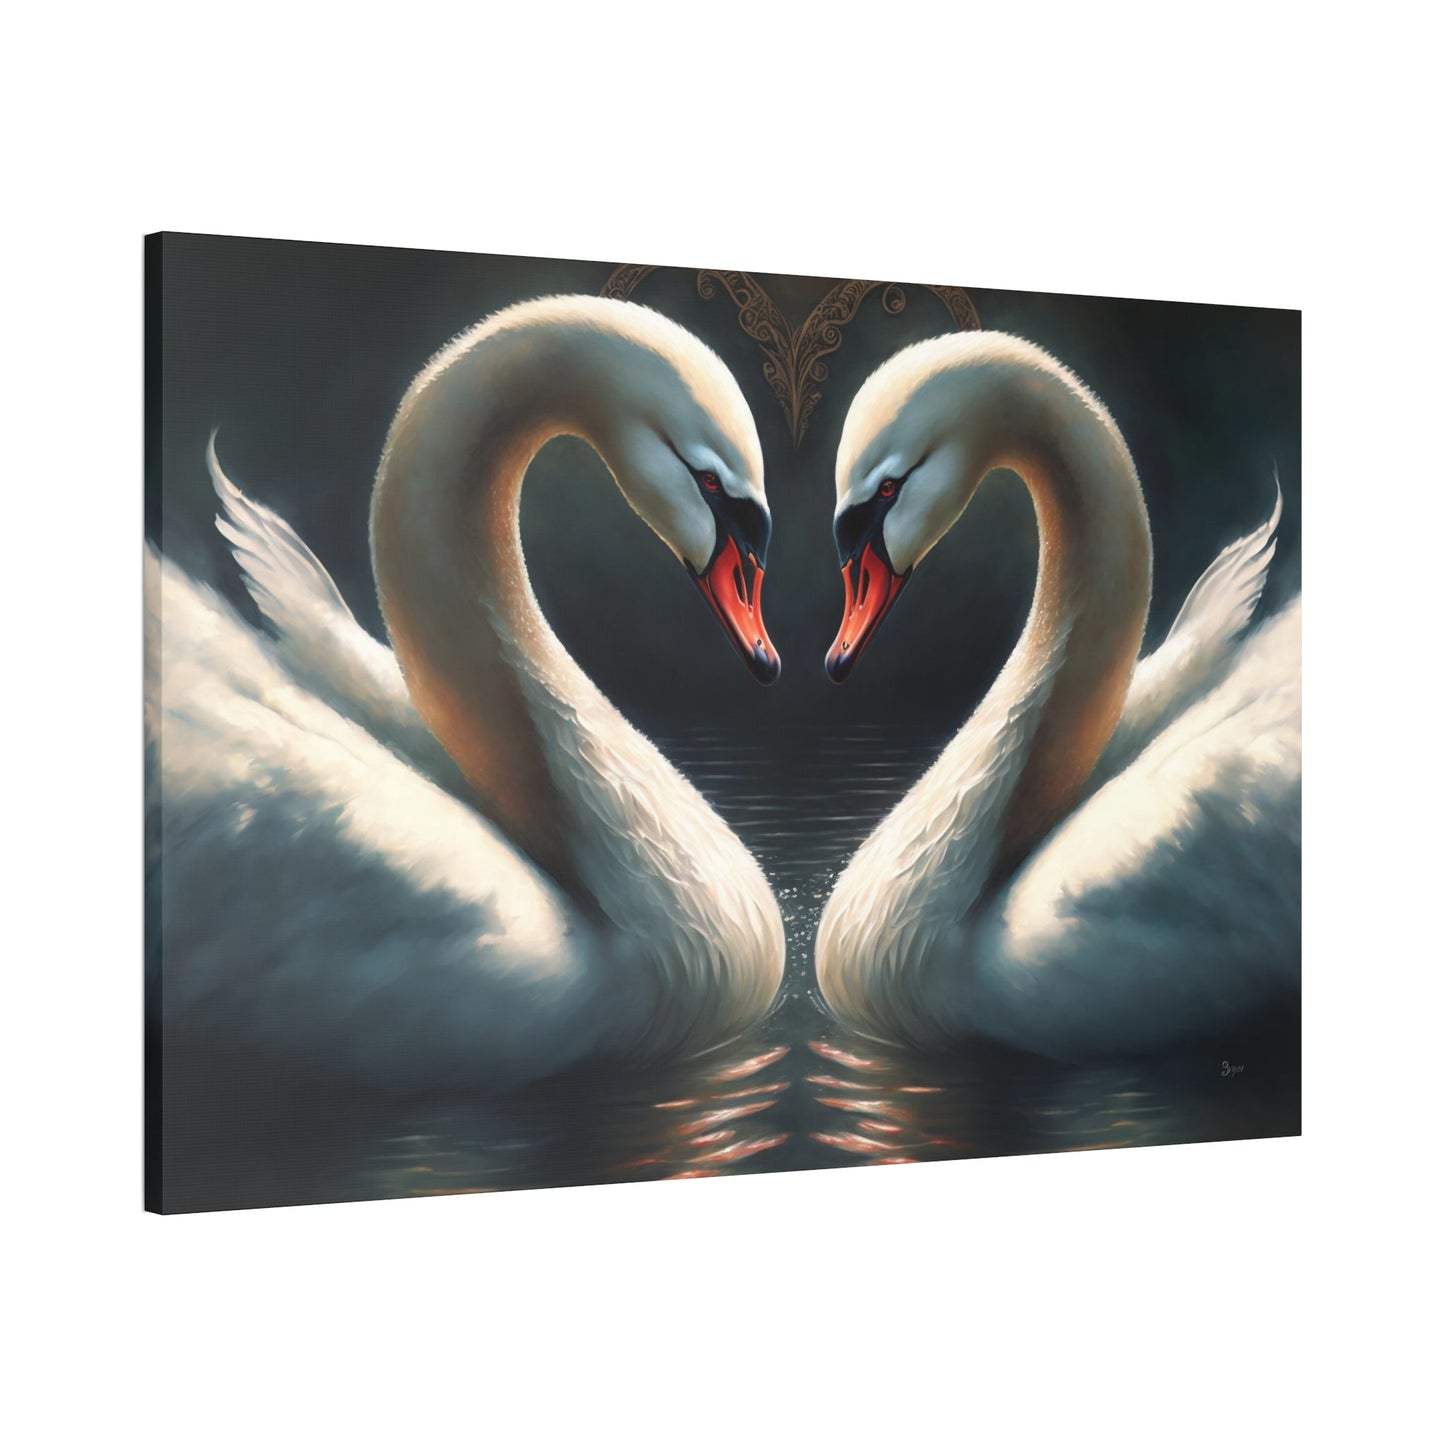 Natural Canvas & Poster Print of Swans in a Calm Setting